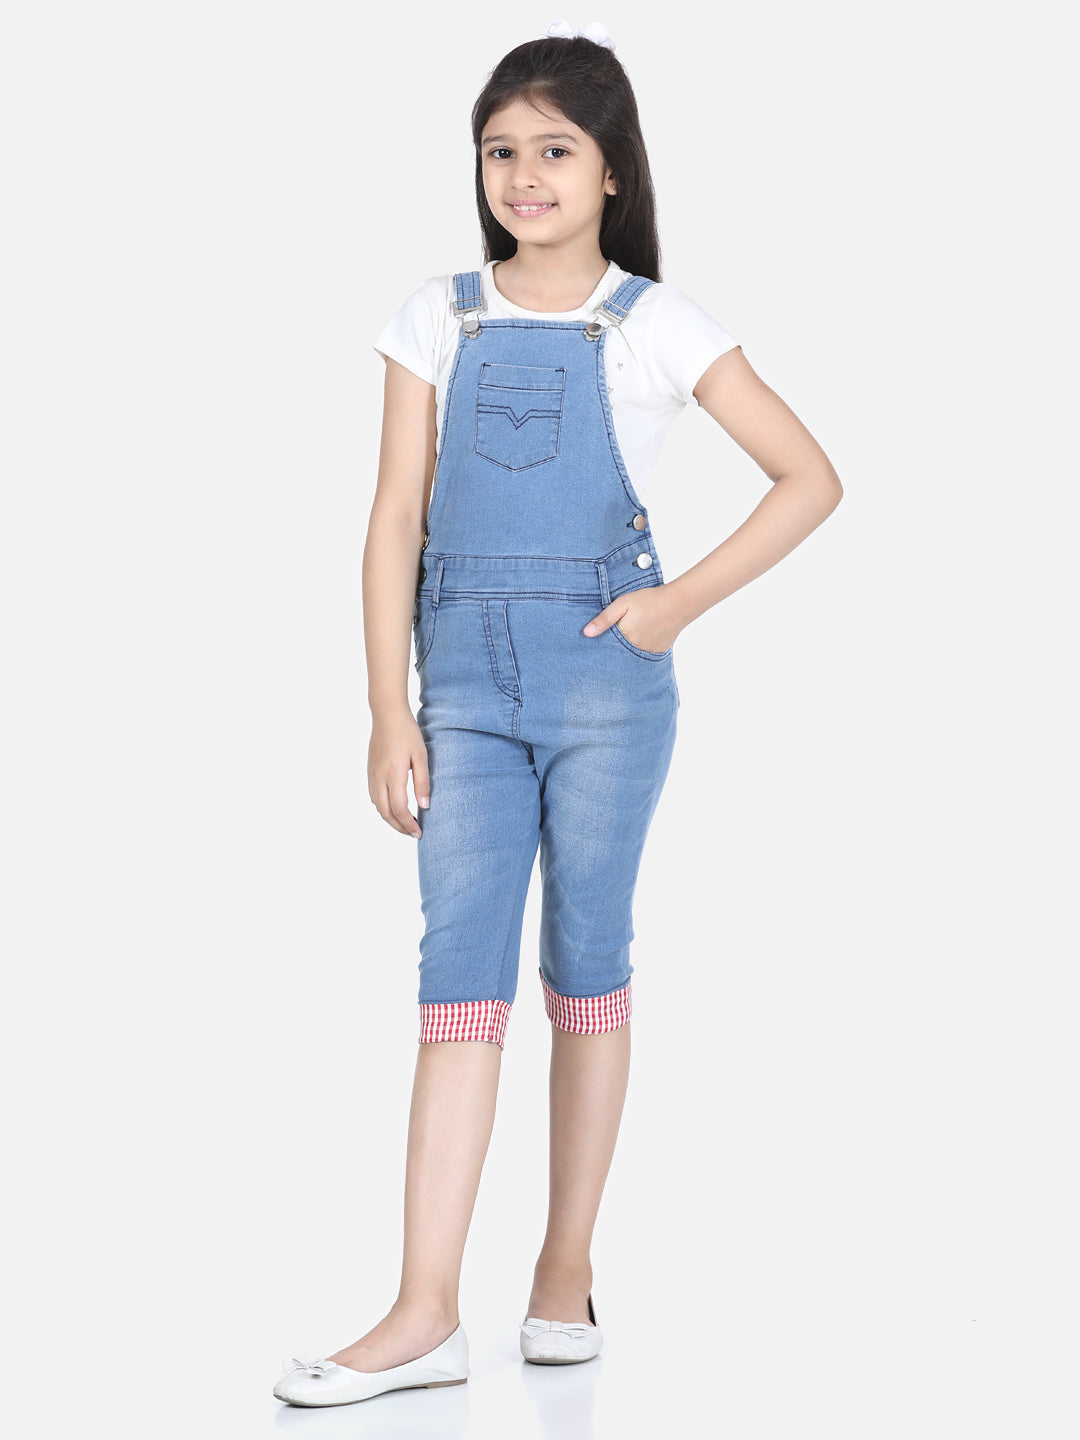 Girls Denim Roll Up Dungaree (T-shirt not included)